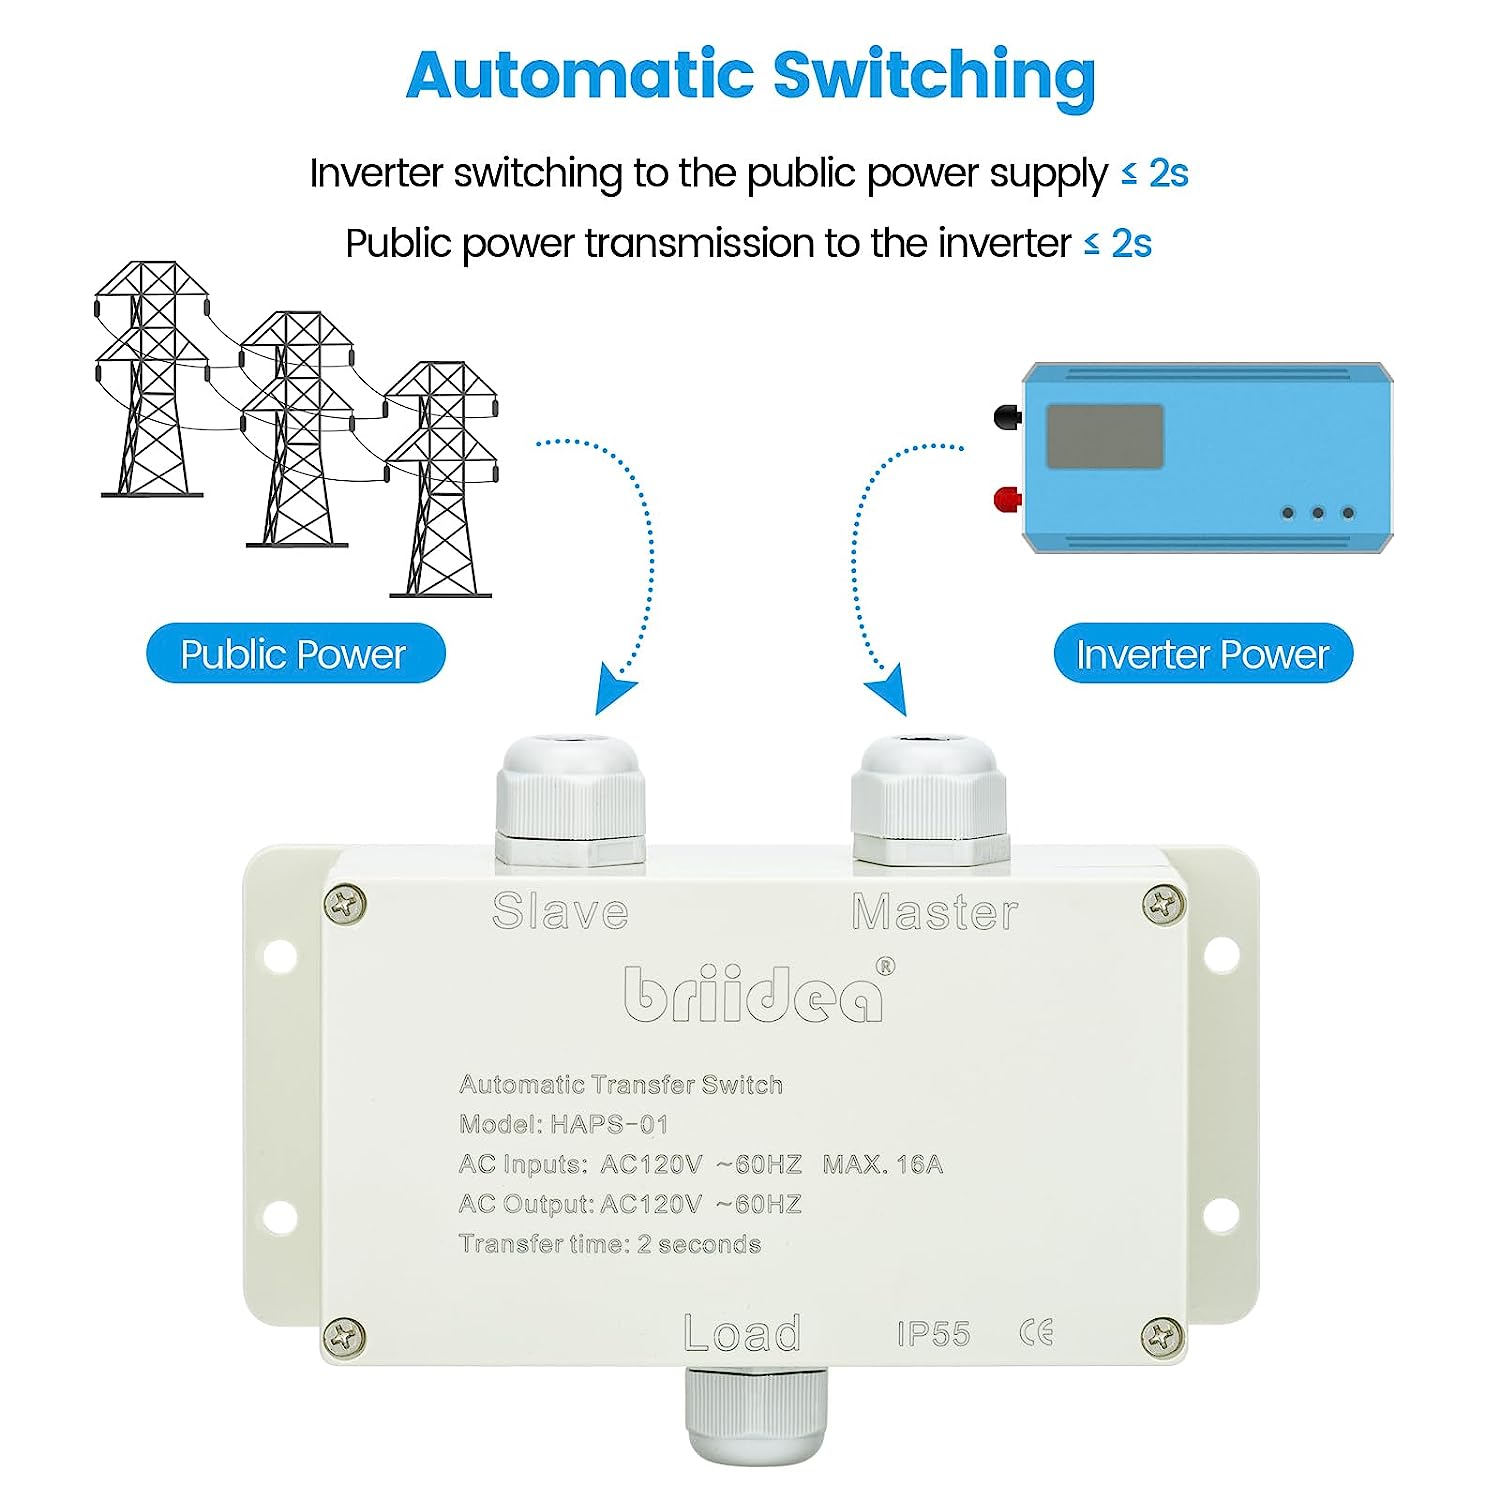 Automatic Transfer Switch, Briidea 120 VAC 16 AMP ATS Auto Transfer Switch for Inverter and Main Powers, UL Listed, Suitable for Use in Boats, RVs, Solar Power Systems, Motorhomes